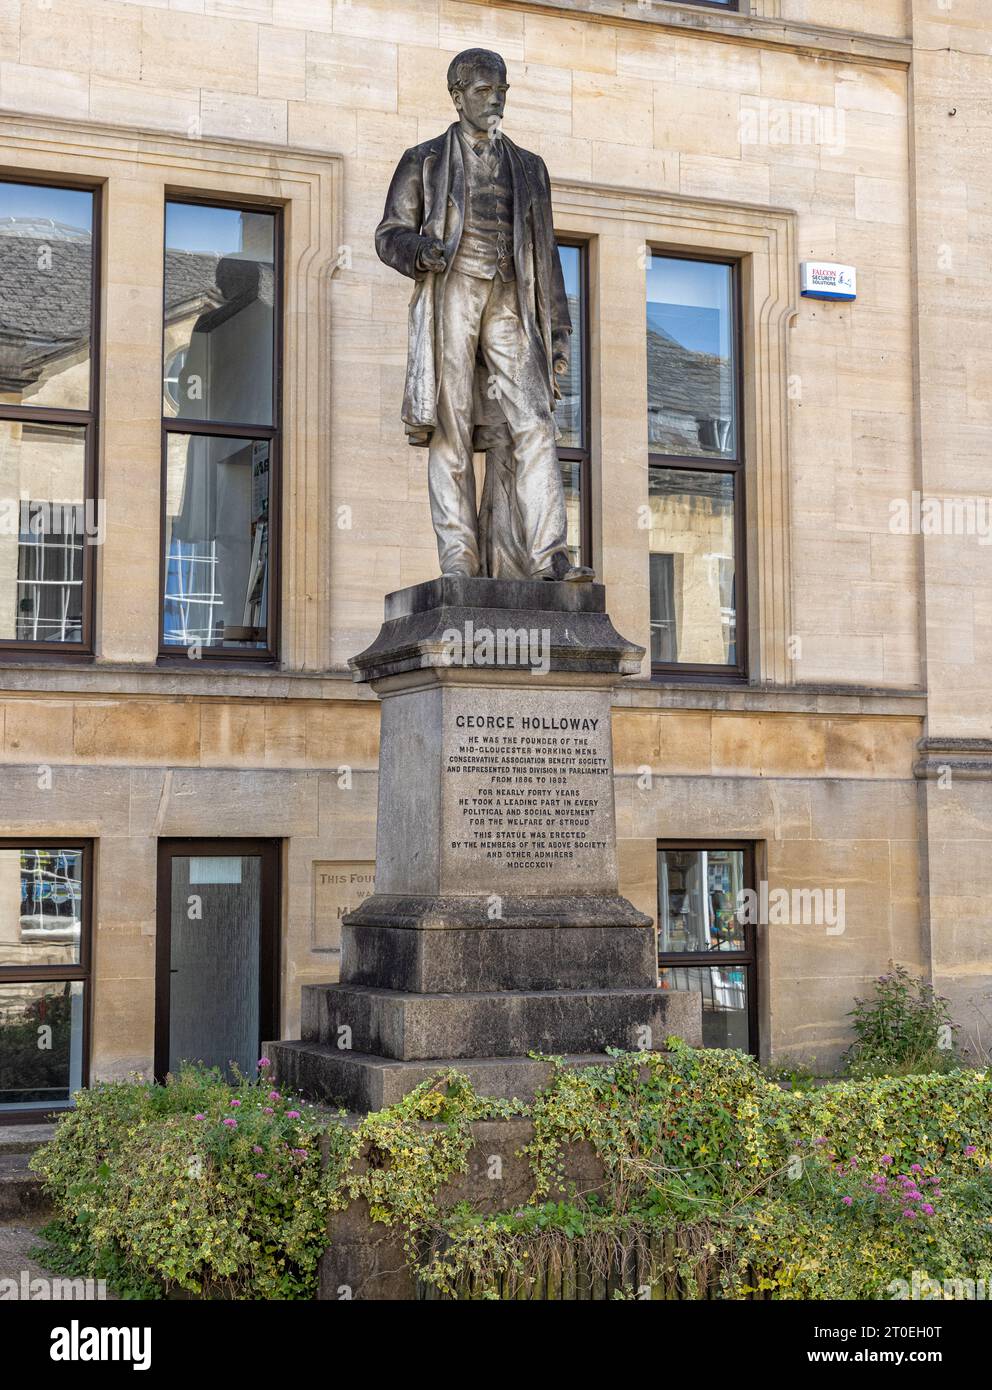 Statue of George Holloway; member of Parliament and founder of Benefit Society in late 19th Century; Stroud; Gloucestershire; United Kingdom Stock Photo